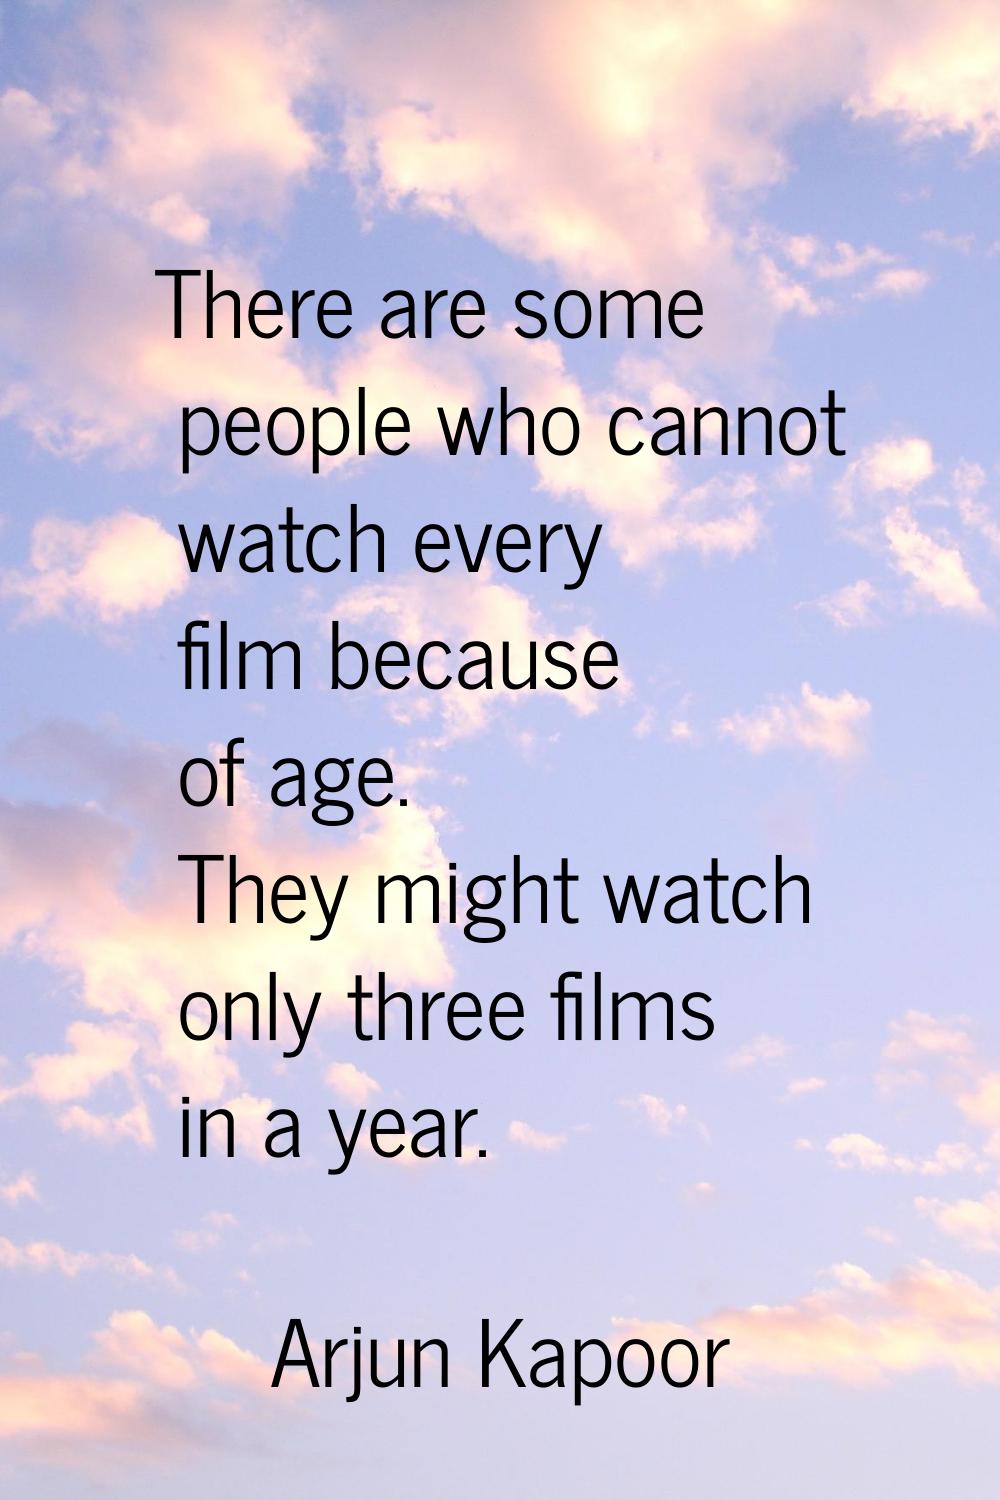 There are some people who cannot watch every film because of age. They might watch only three films